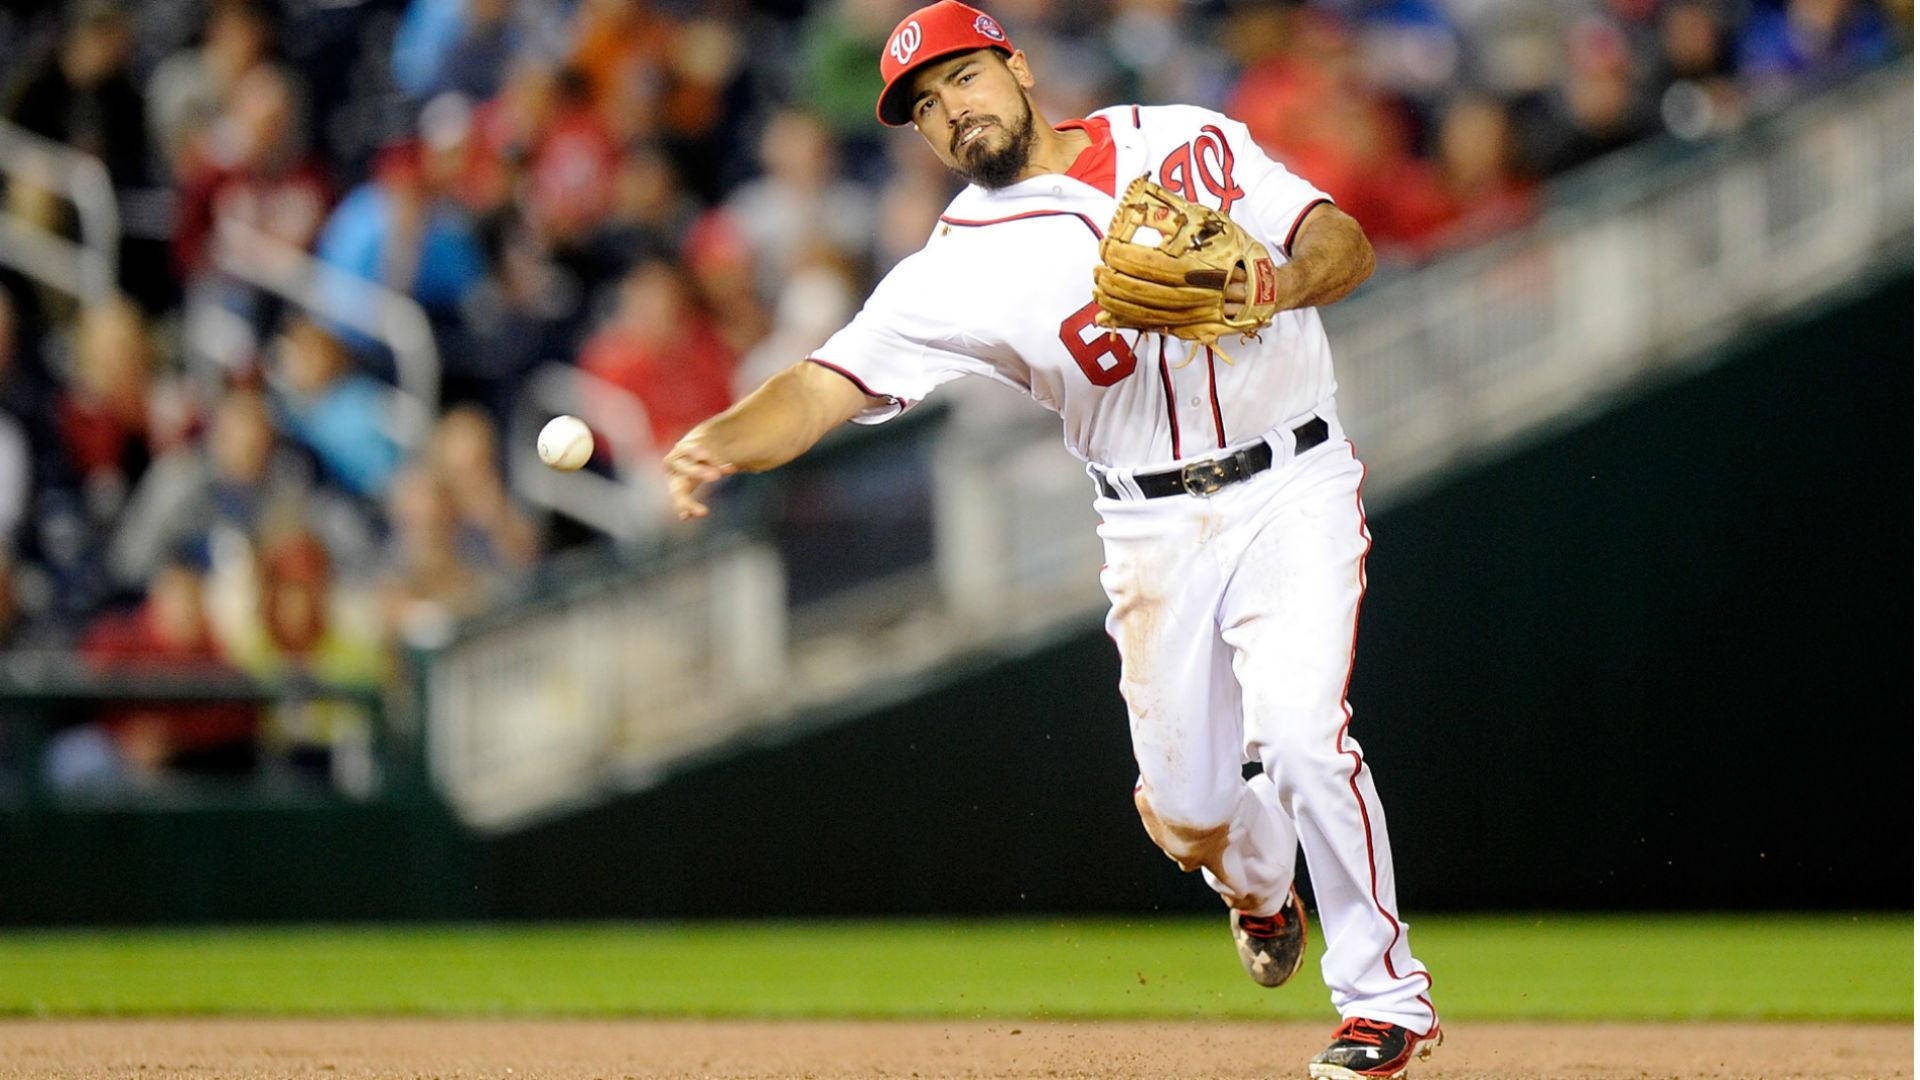 Anthony Rendon Extending Arm To Catch Baseball Background